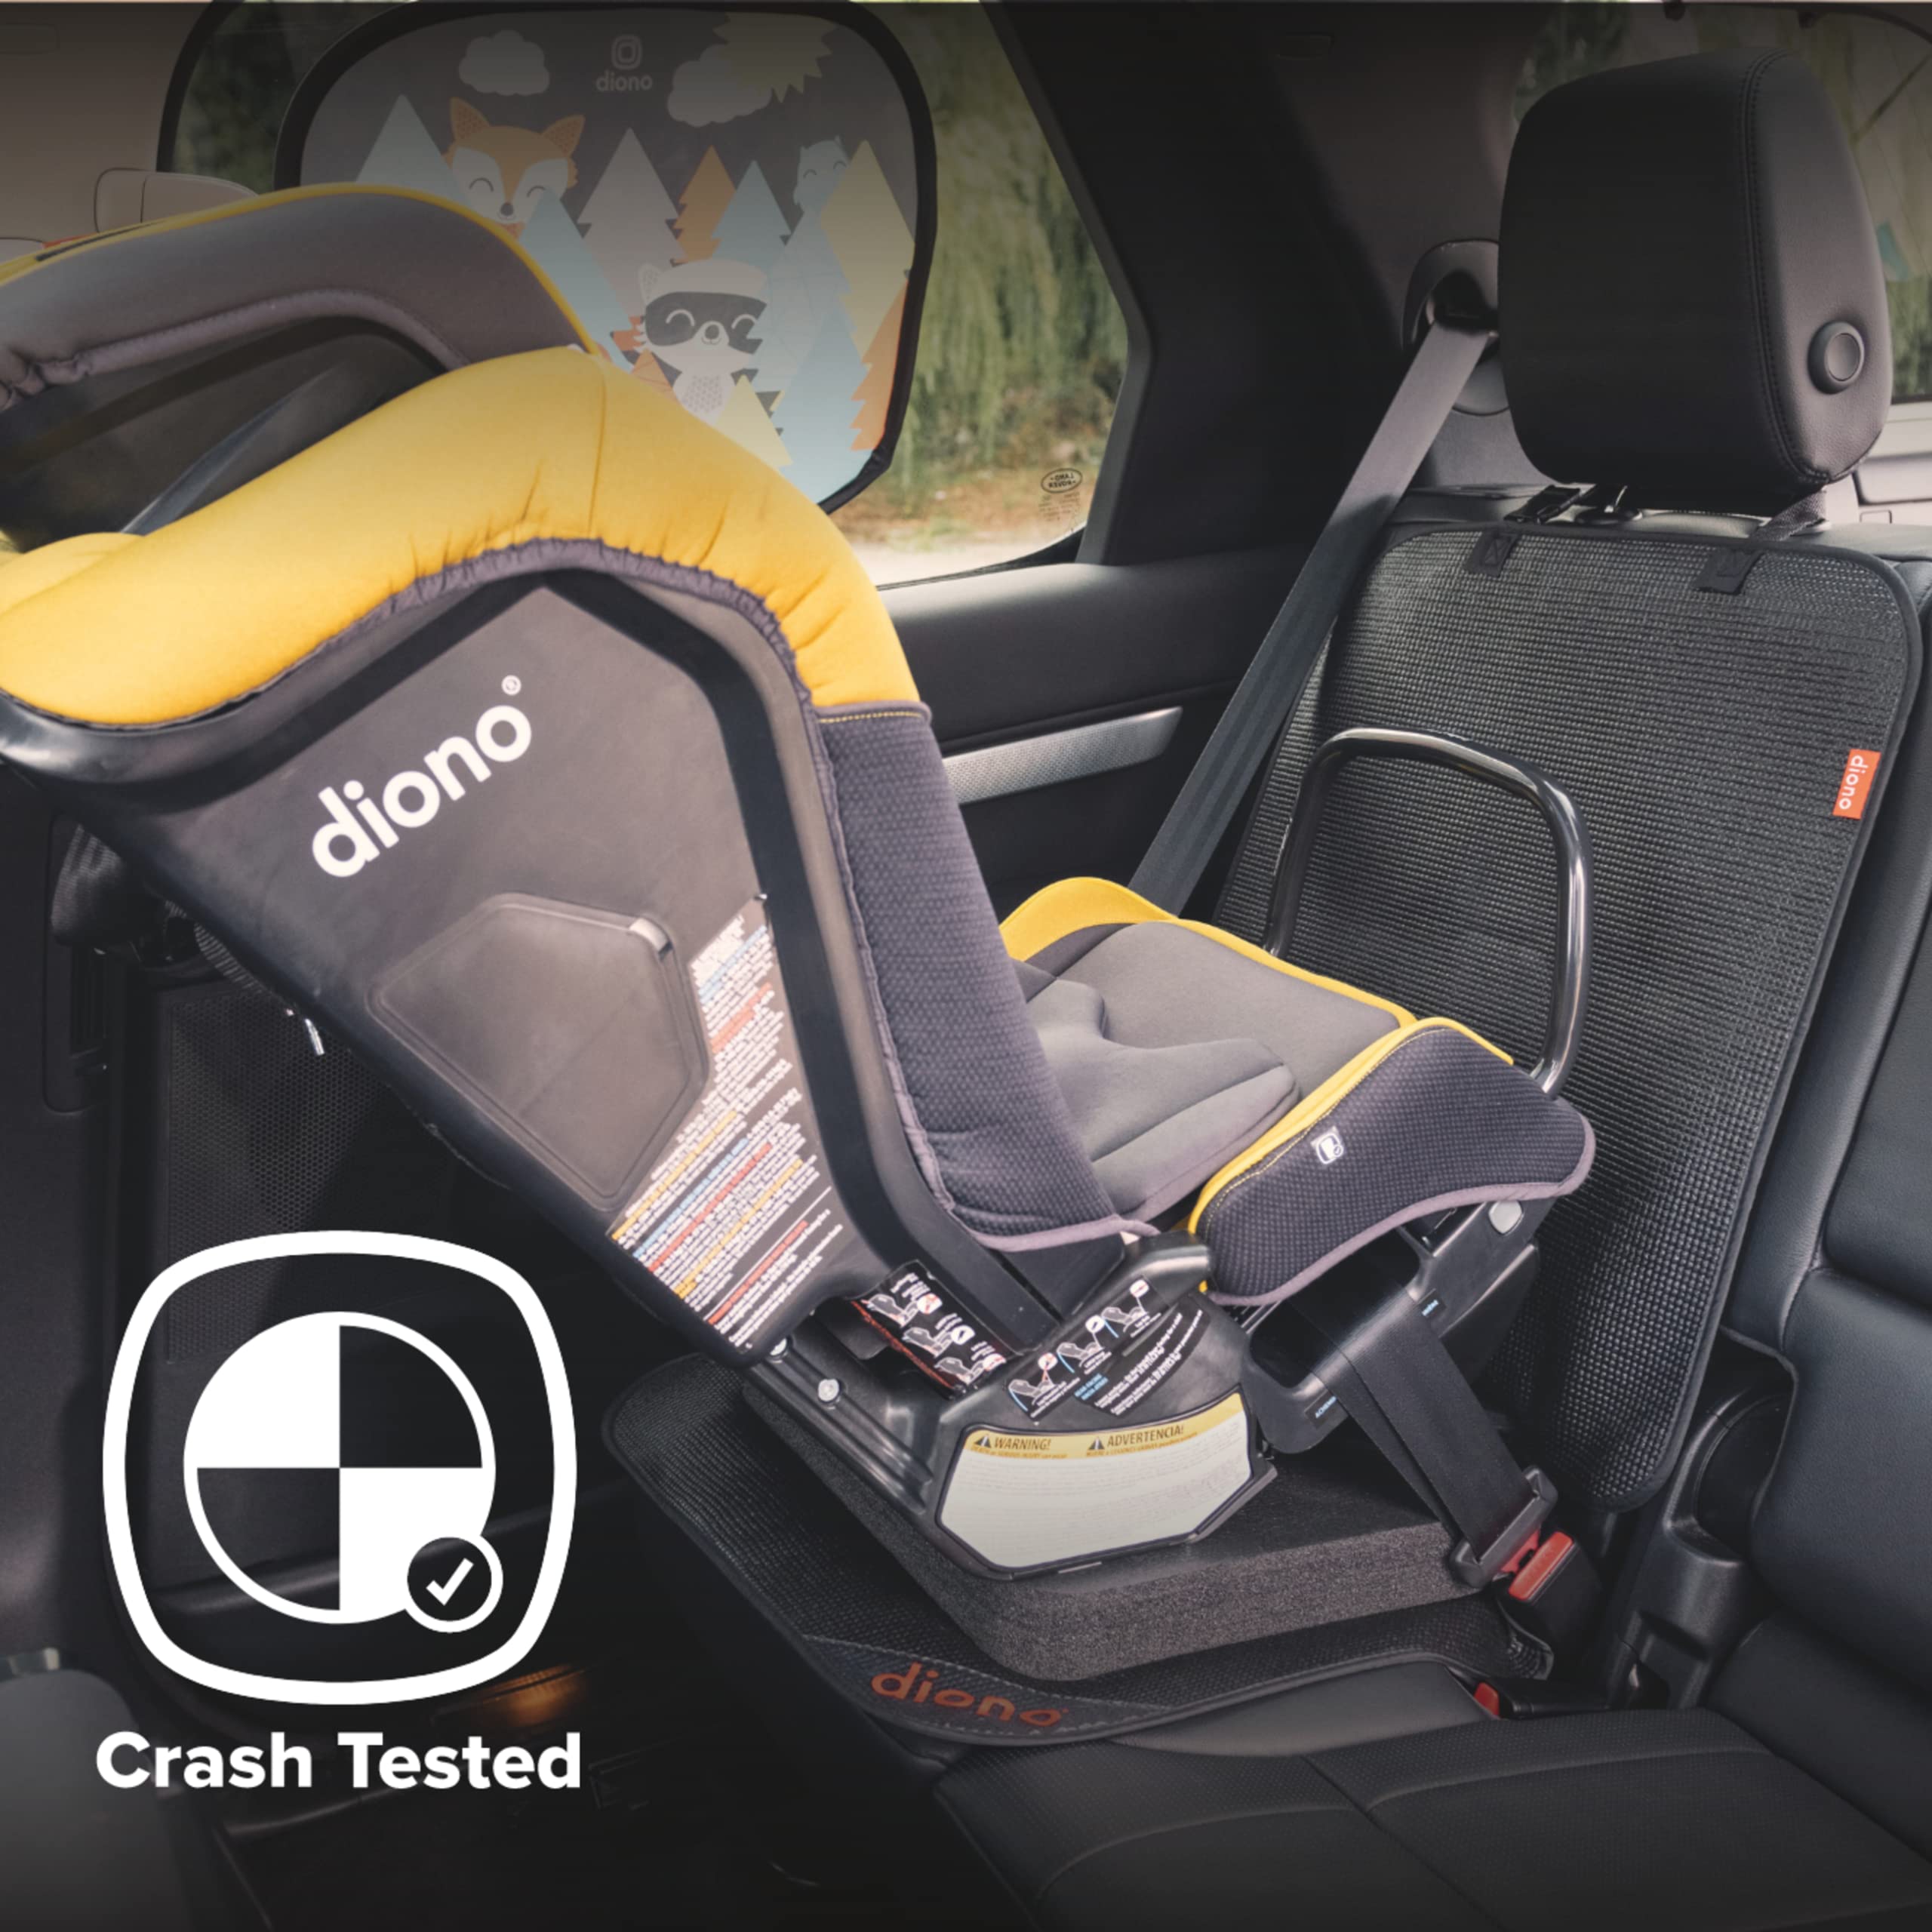 Diono Grip It Car Seat Protector 3-Pack for Baby Child Car Seat, Crash Tested with Full Seat Cover, Anti Slip Backing, Durable, Water Resistant Protection for Vehicle Upholstery